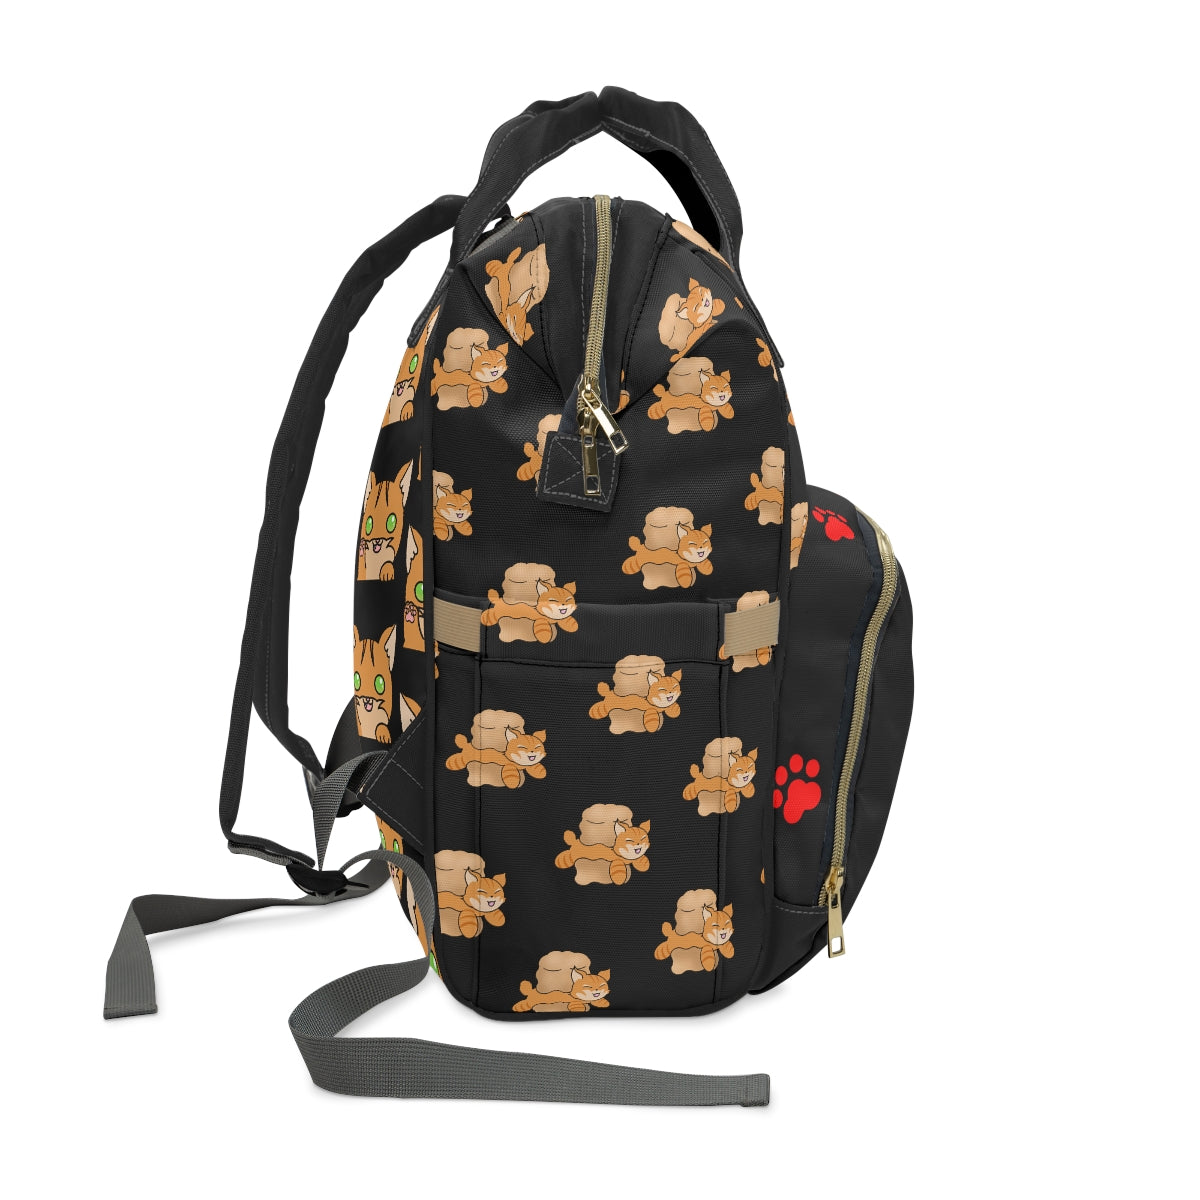 Stand out  with the  Multifunctional Backpack  available at Hey Nugget. Grab yours today!